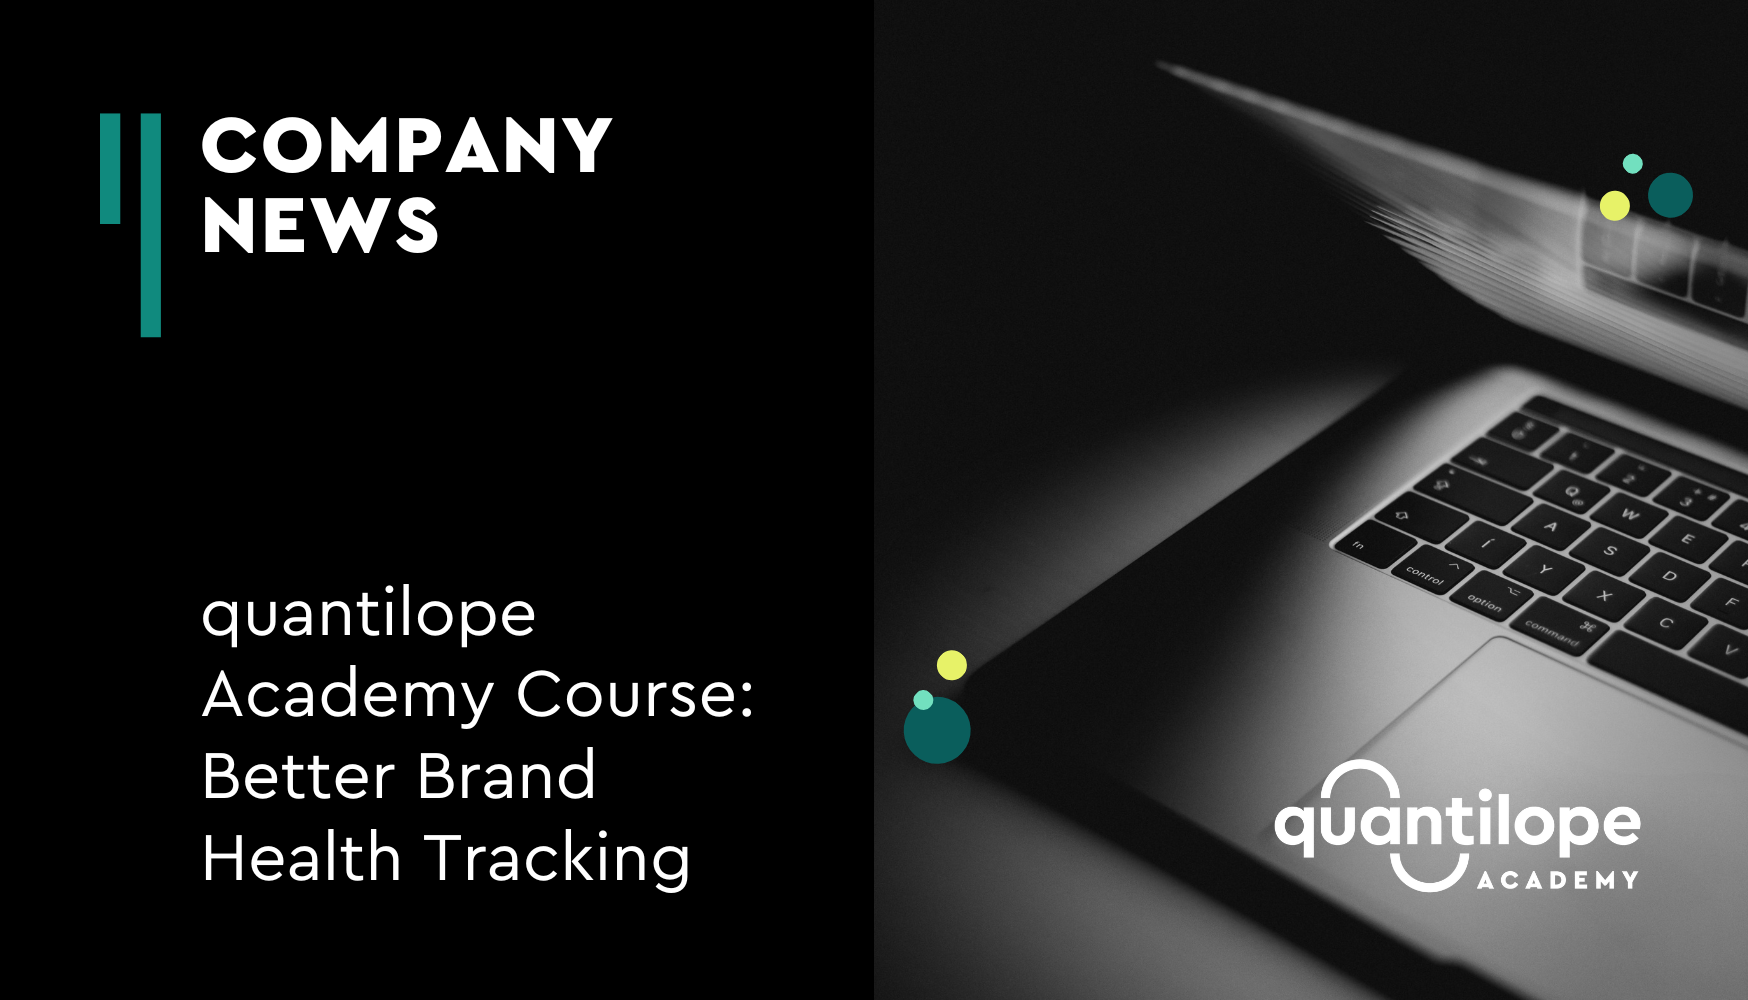 better brand health tracking quantilope academy course